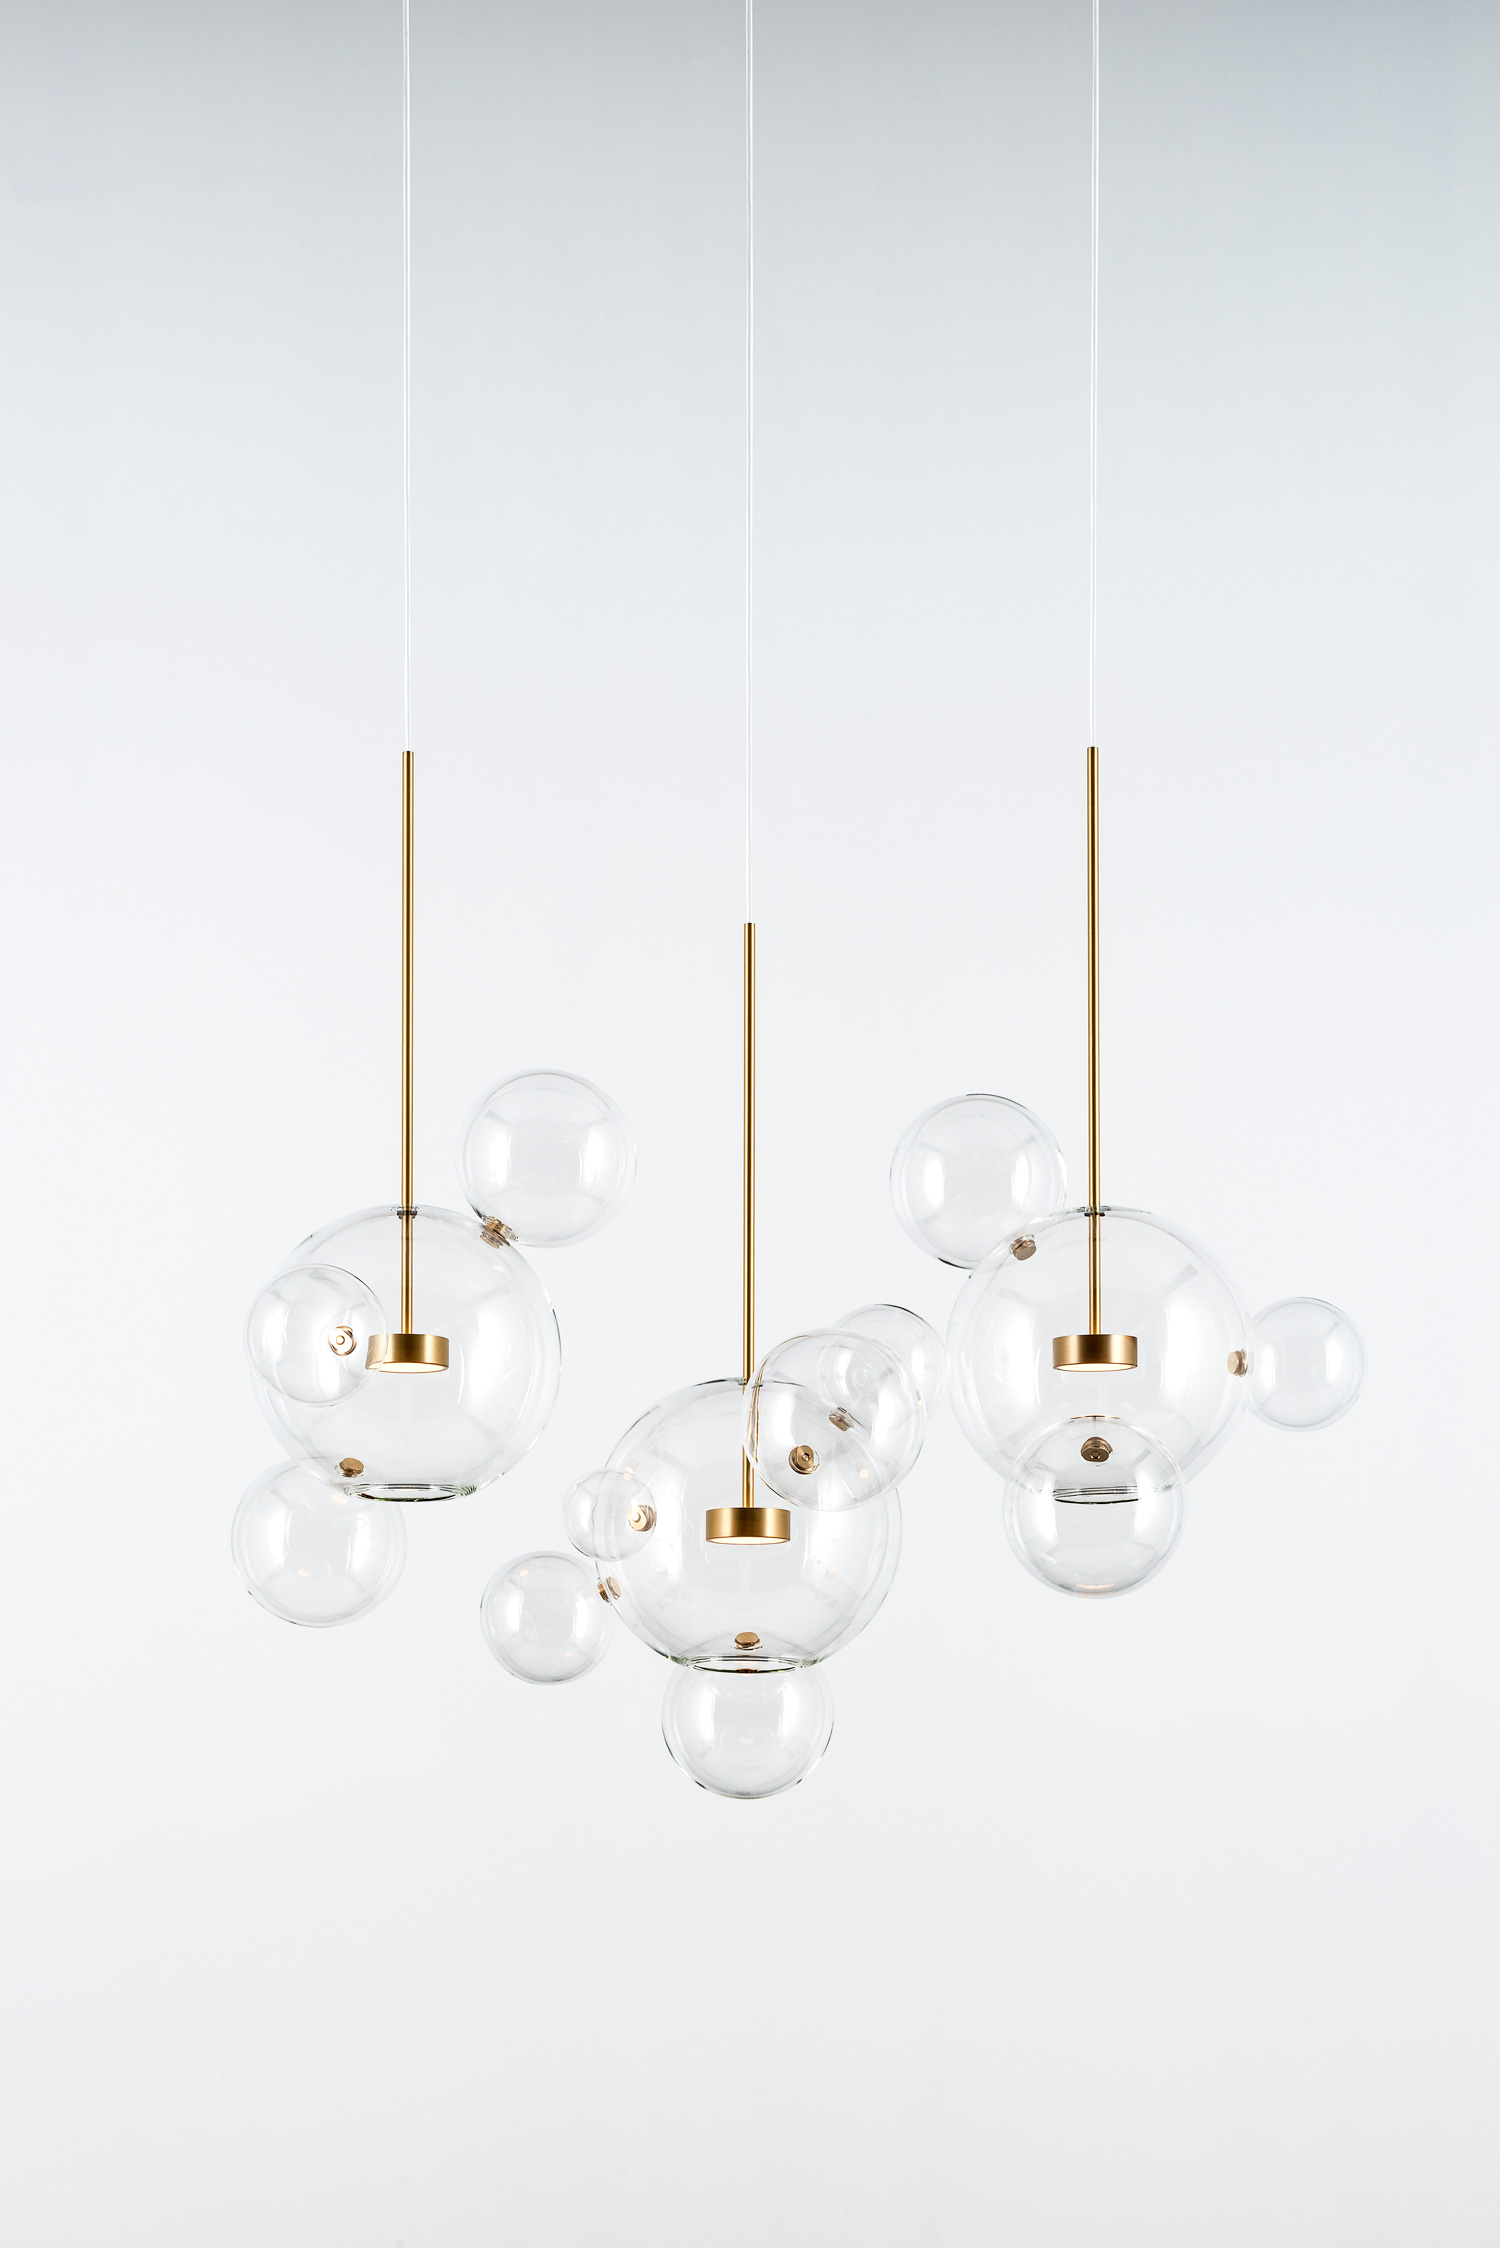 Giopato_Coombes_Bolle_Linear_Chandelier_14_Bubbles_Ph_FedericoVilla.jpg